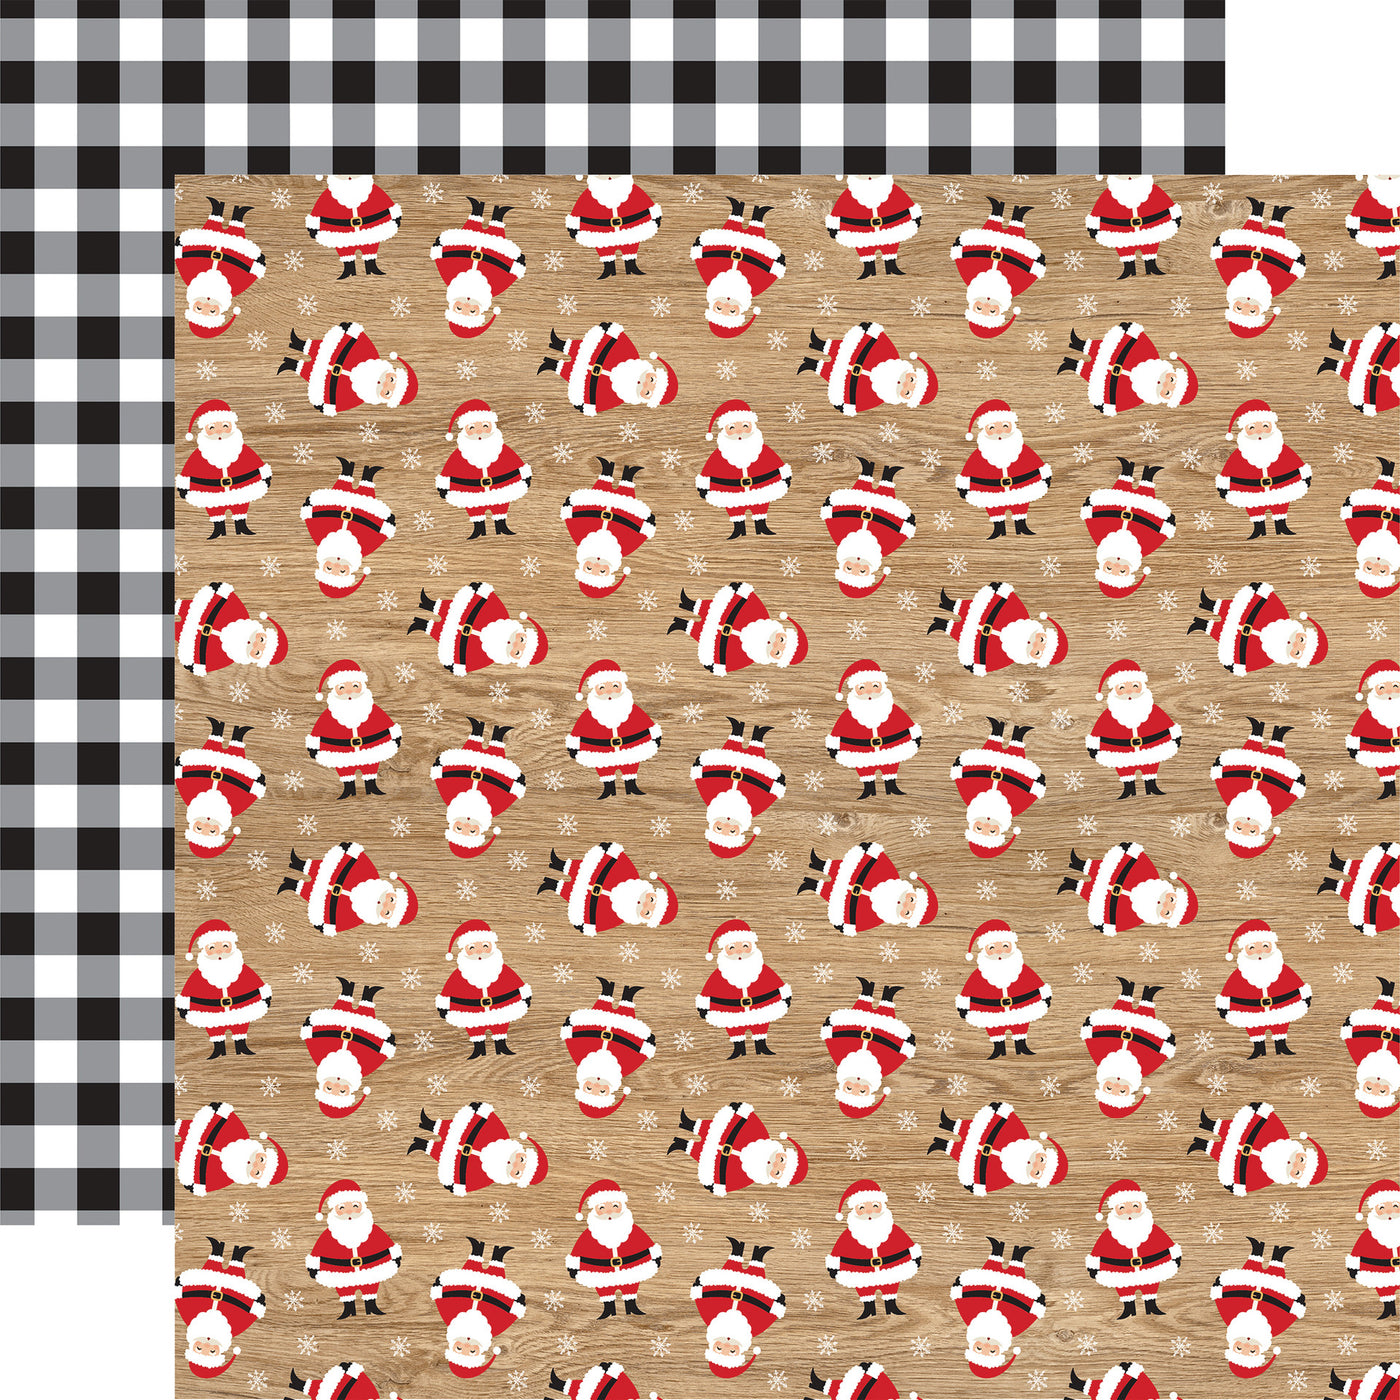 Archival safe (Side A - Santas all over on a brown woodgrain background, Side B - black and white gingham)